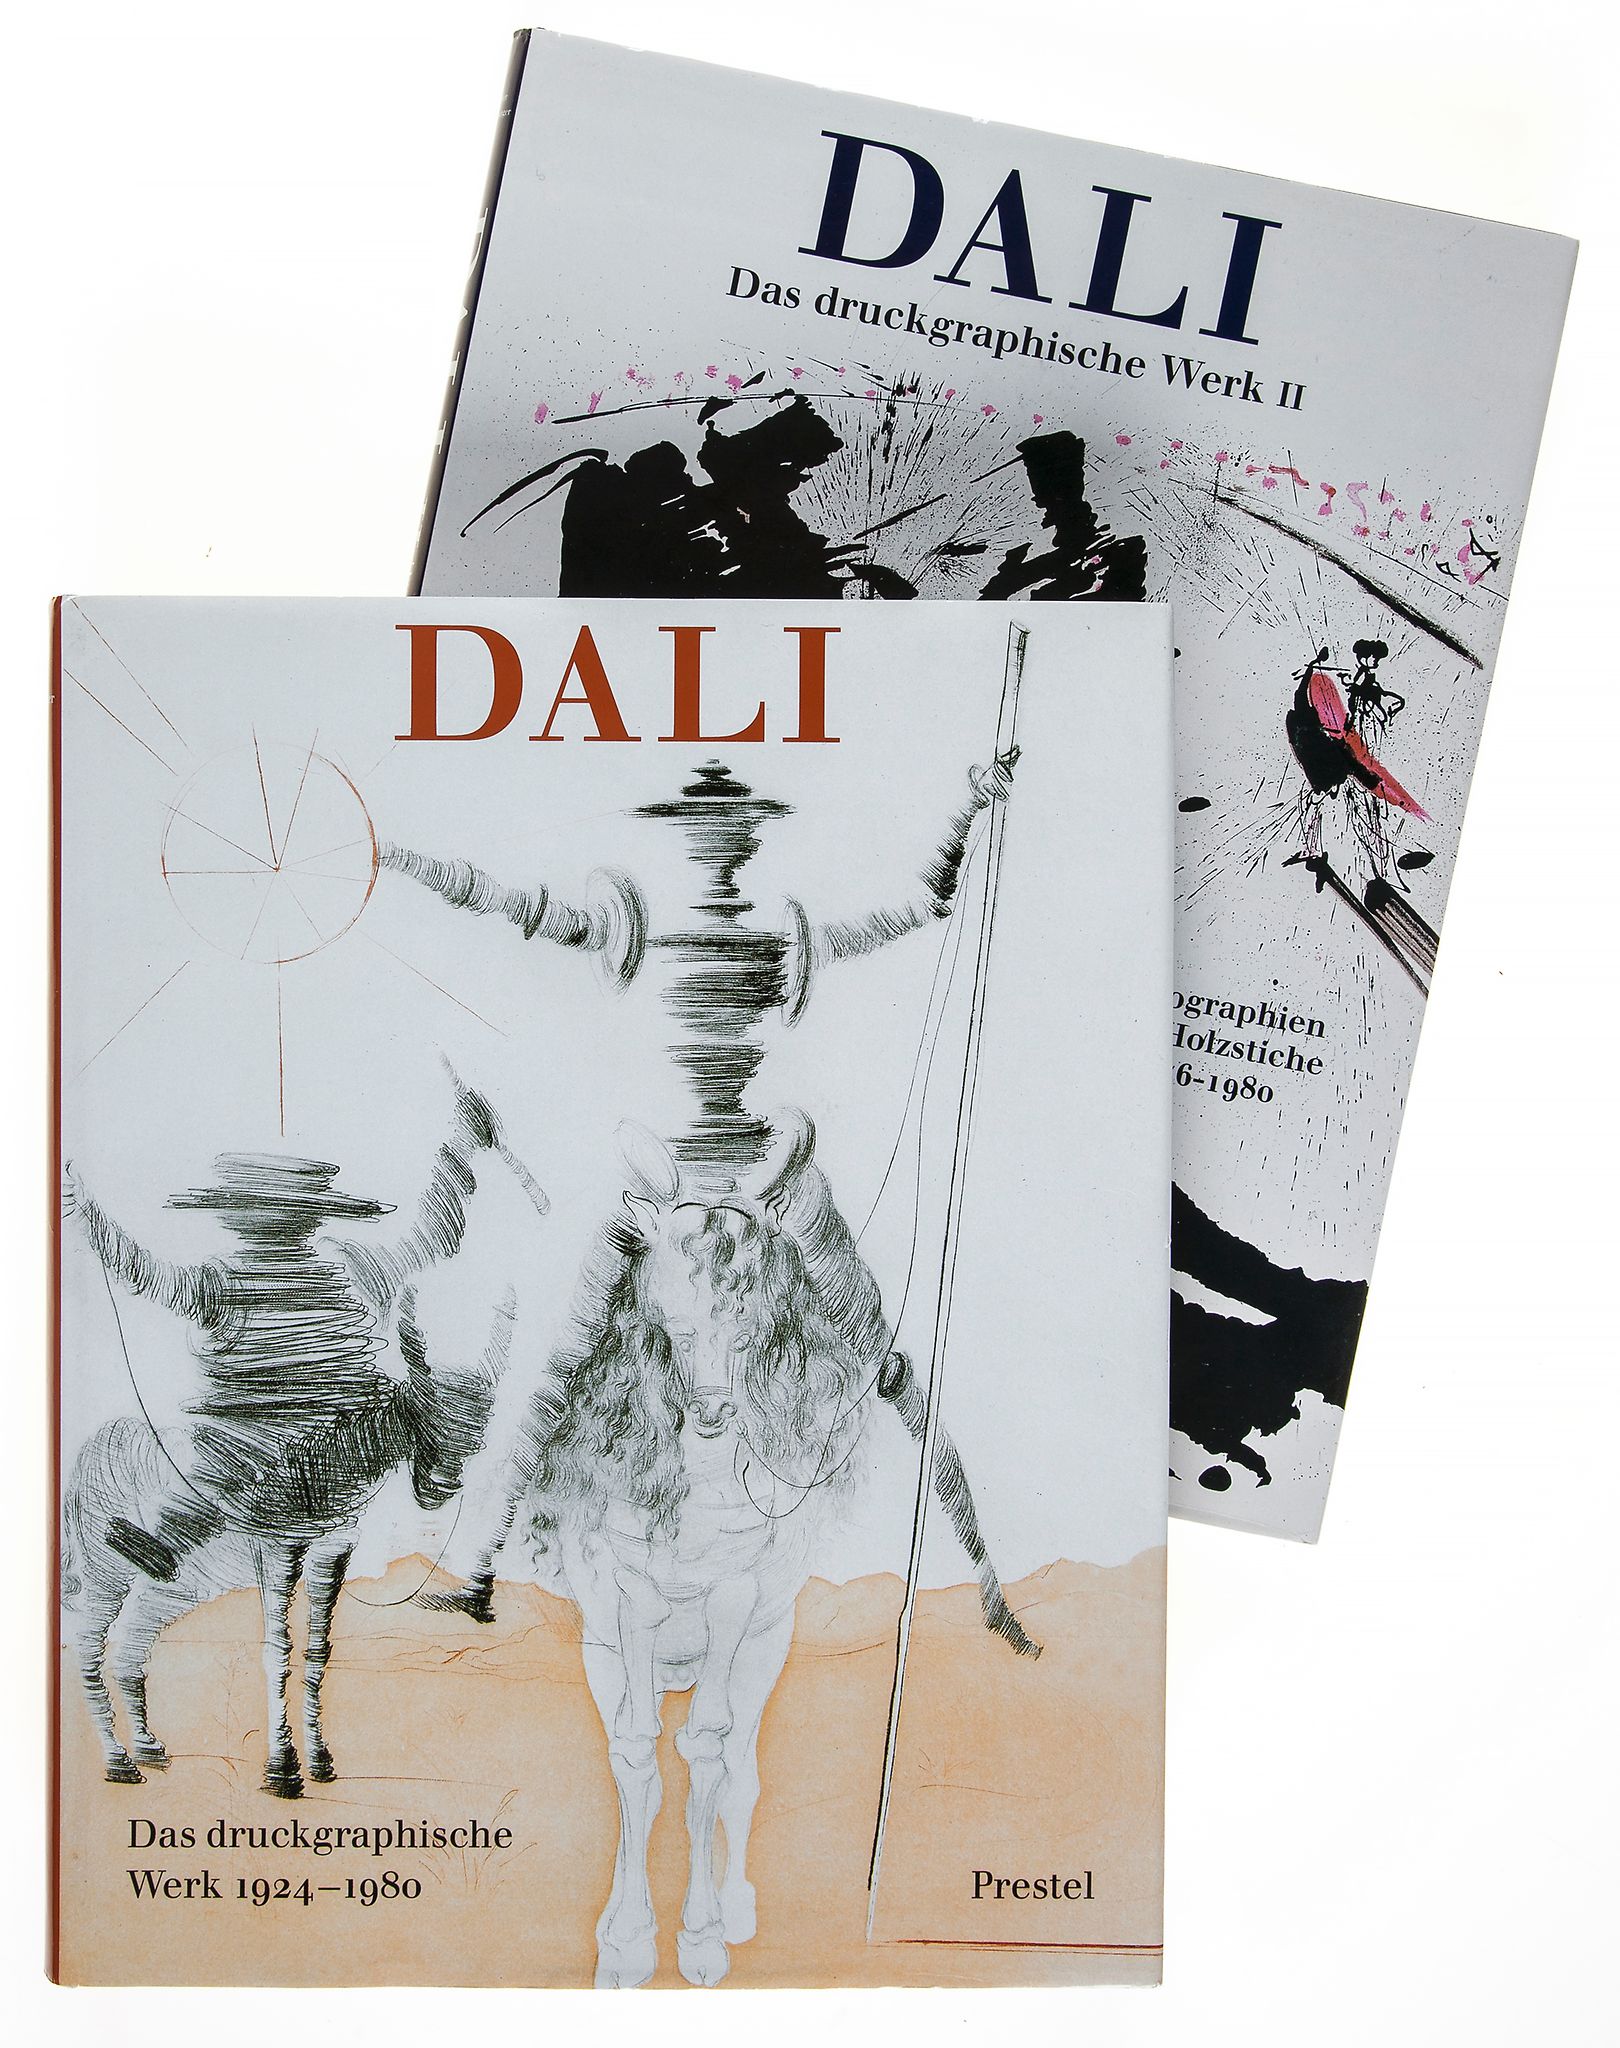 Salvador Dalí (1904-1989) - The Graphic Works 1924-1980 the two volumes of the catalogue raisonne,